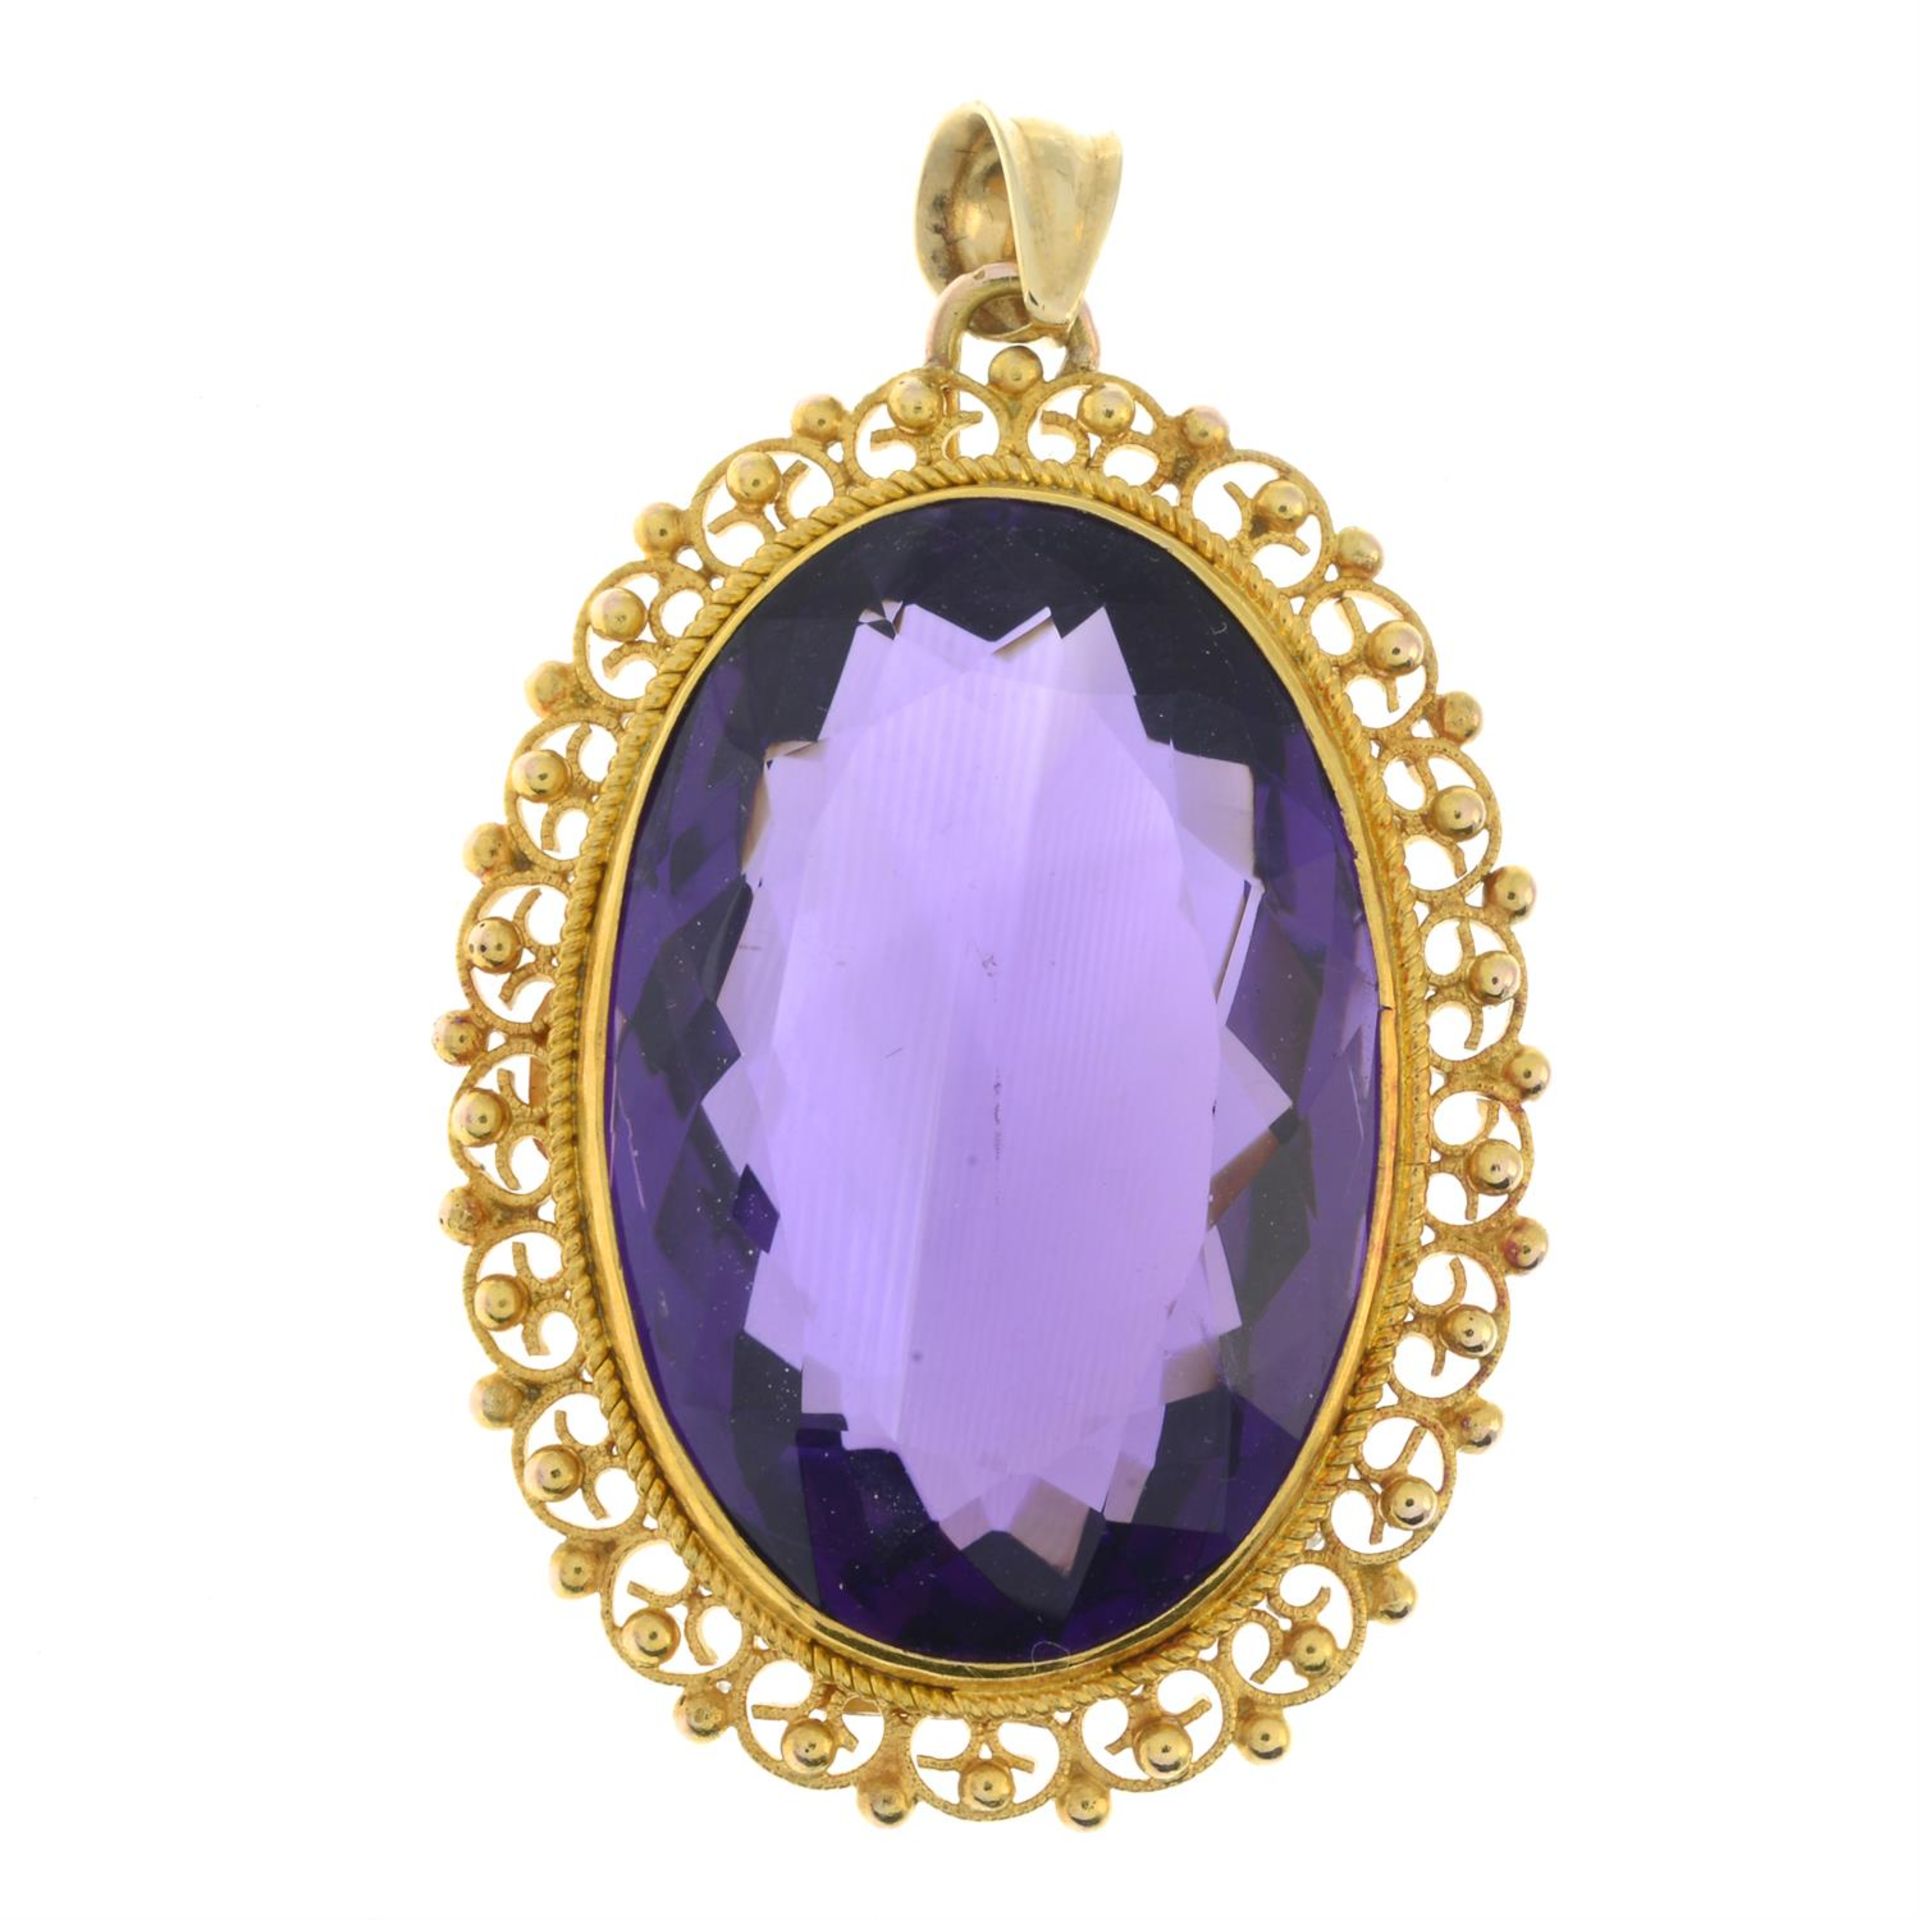 An early 20th century 14ct gold amethyst pendant. - Image 2 of 4